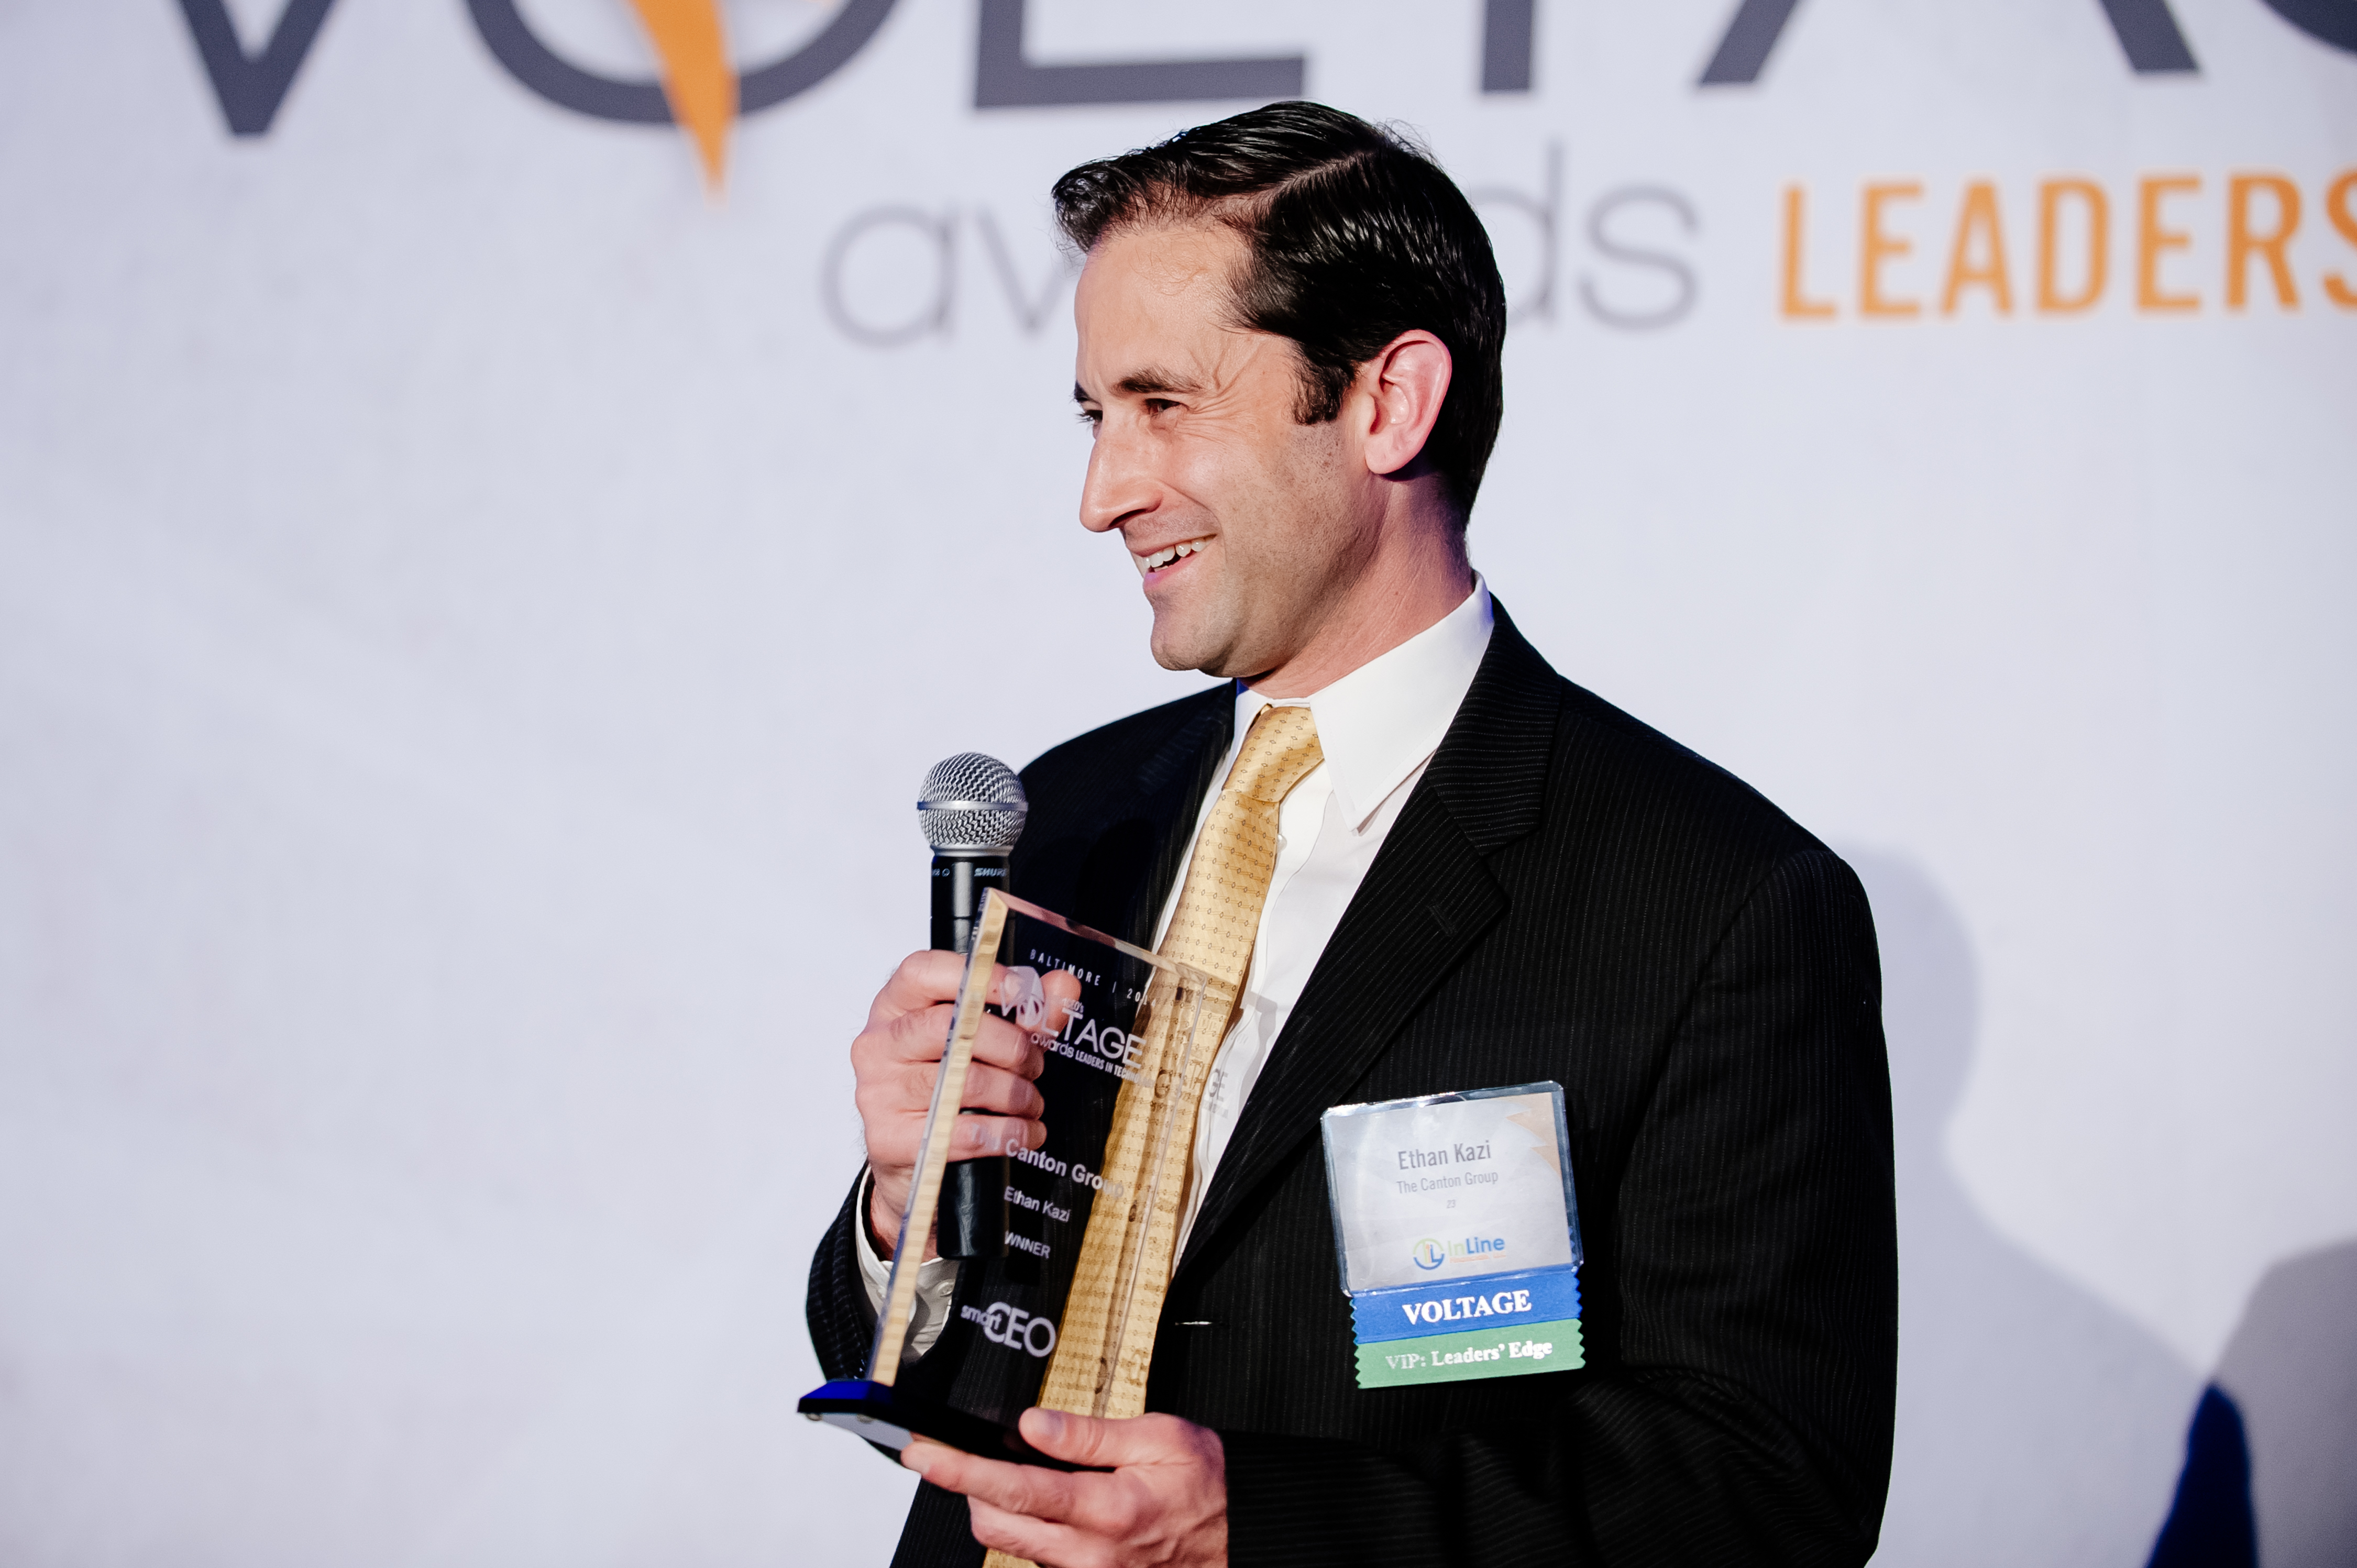 Canton Group CEO, Ethan Kazi wins Voltage Award for "Leaders in Technology, Innovation" from SmartCEO